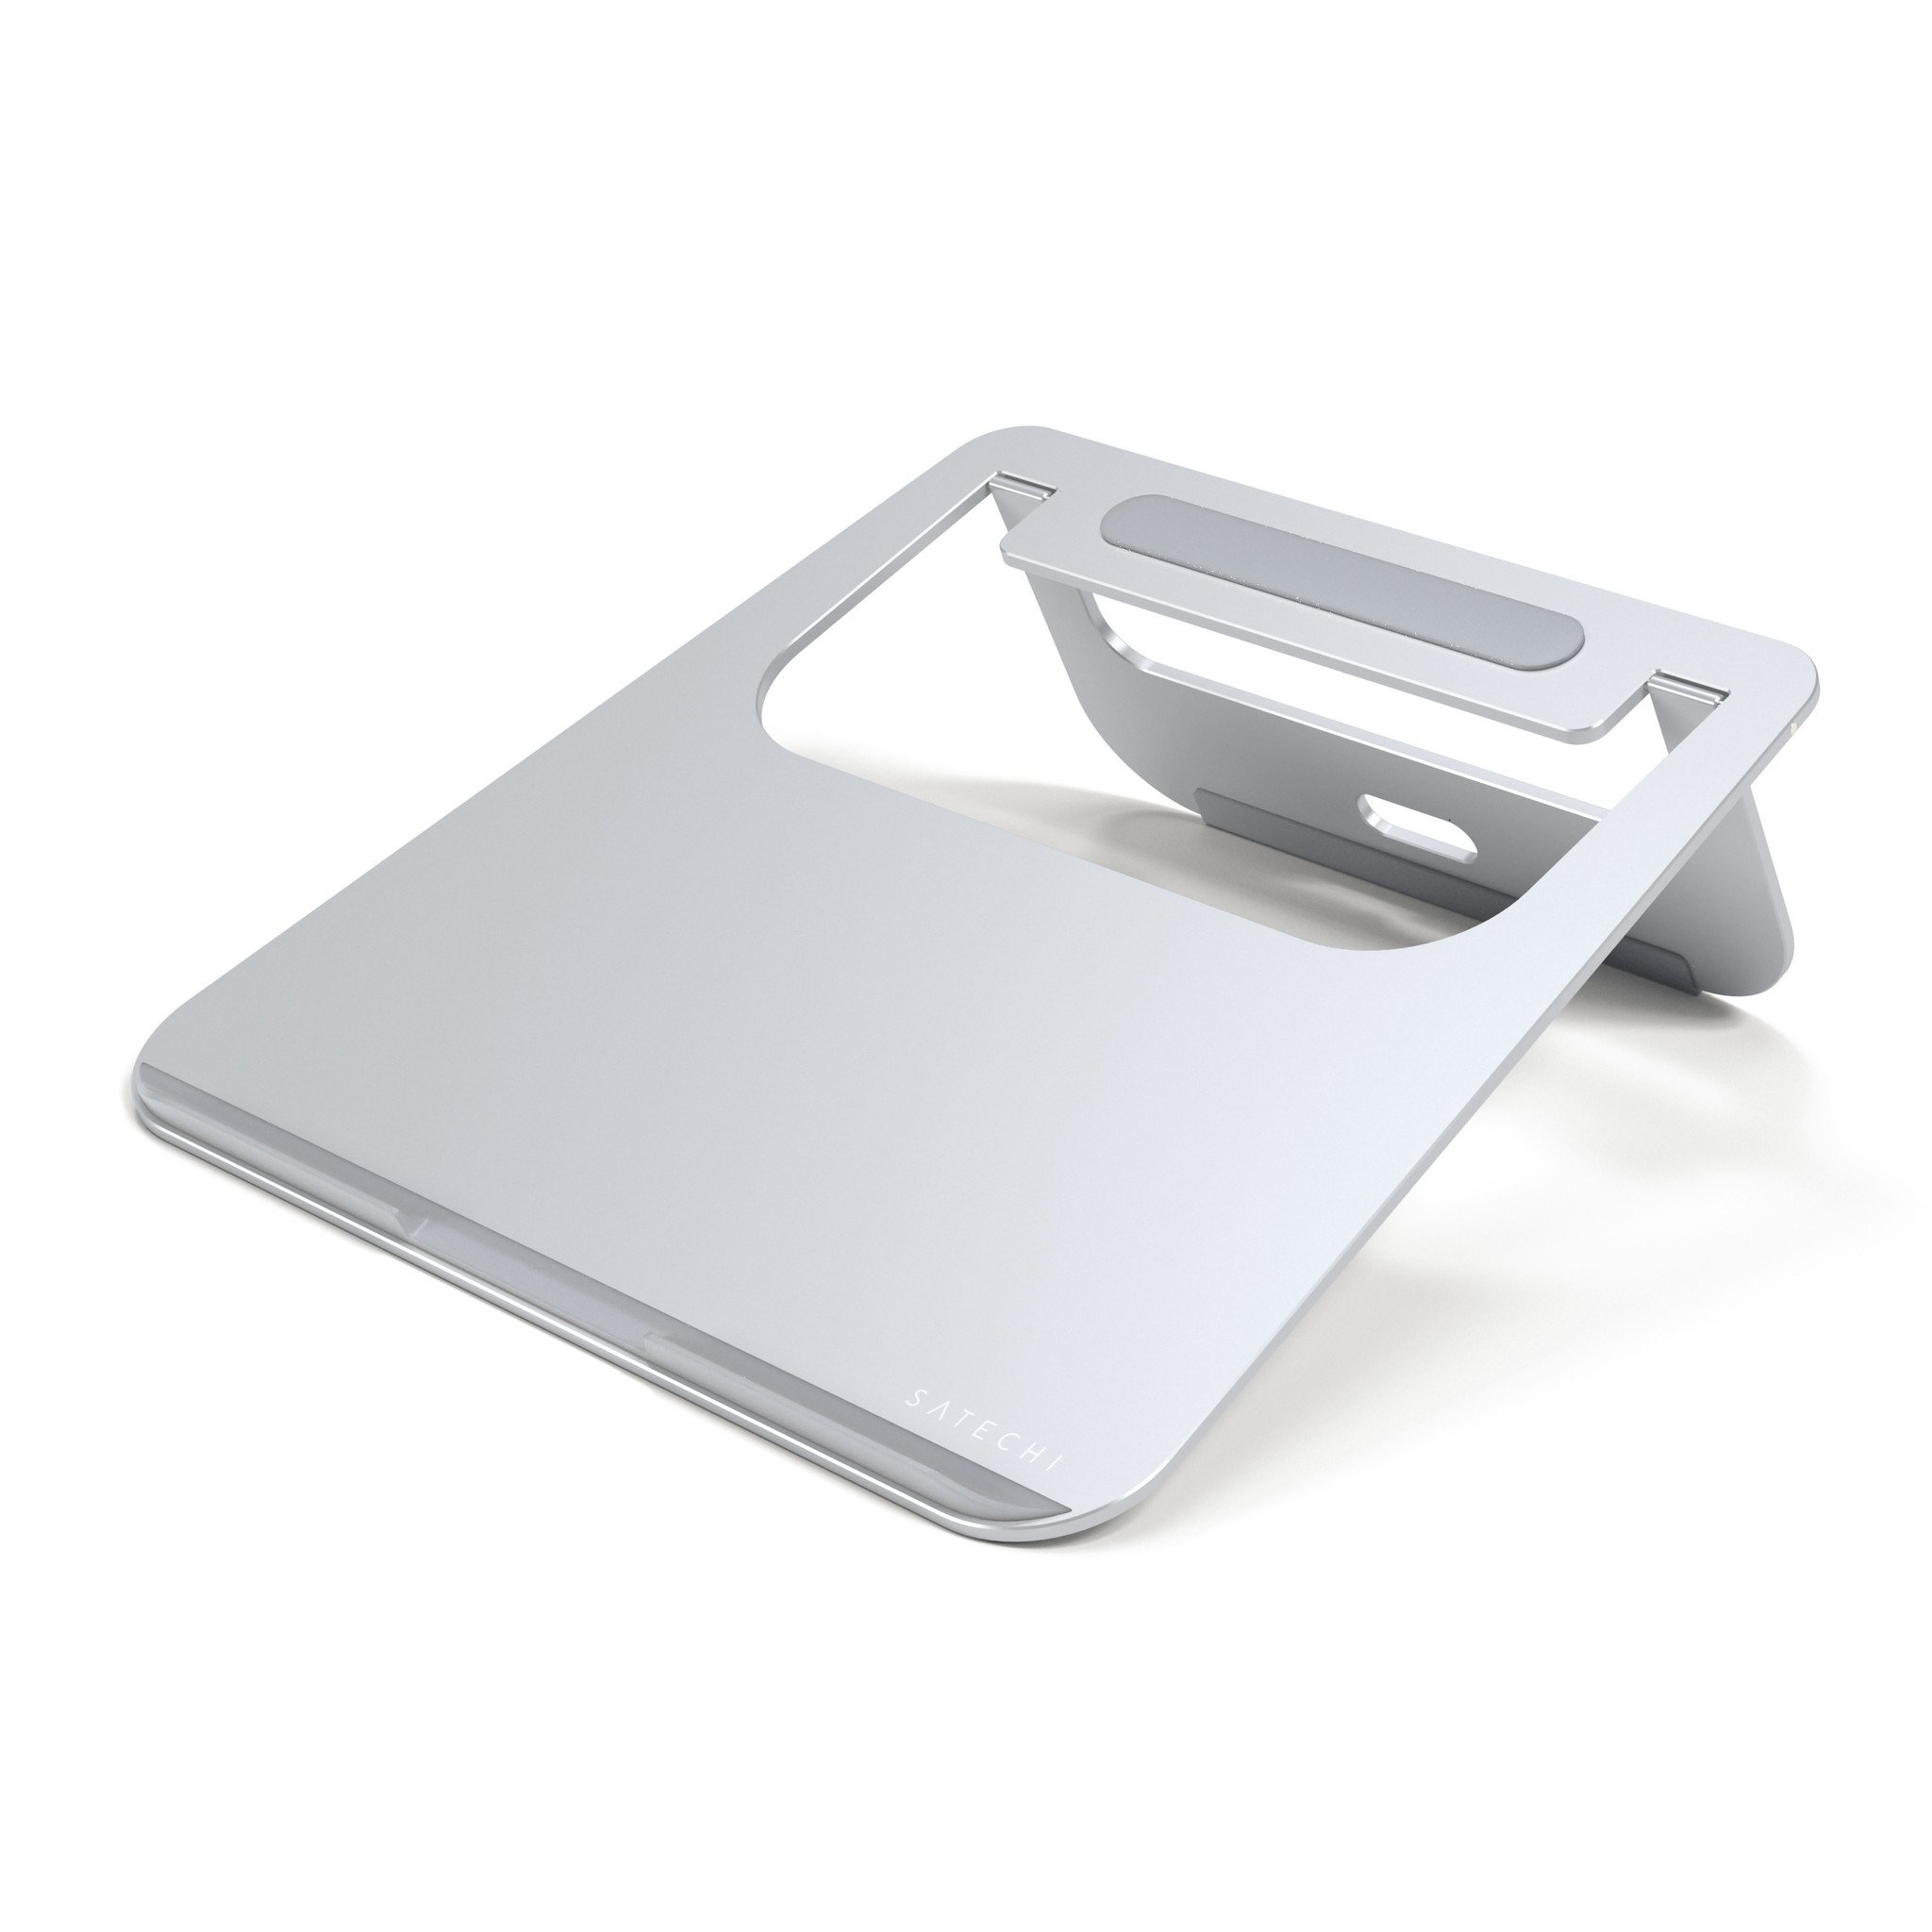 Satechi ST-ALTSS supporto per notebook Notebook stand Argento 43,2 cm (17